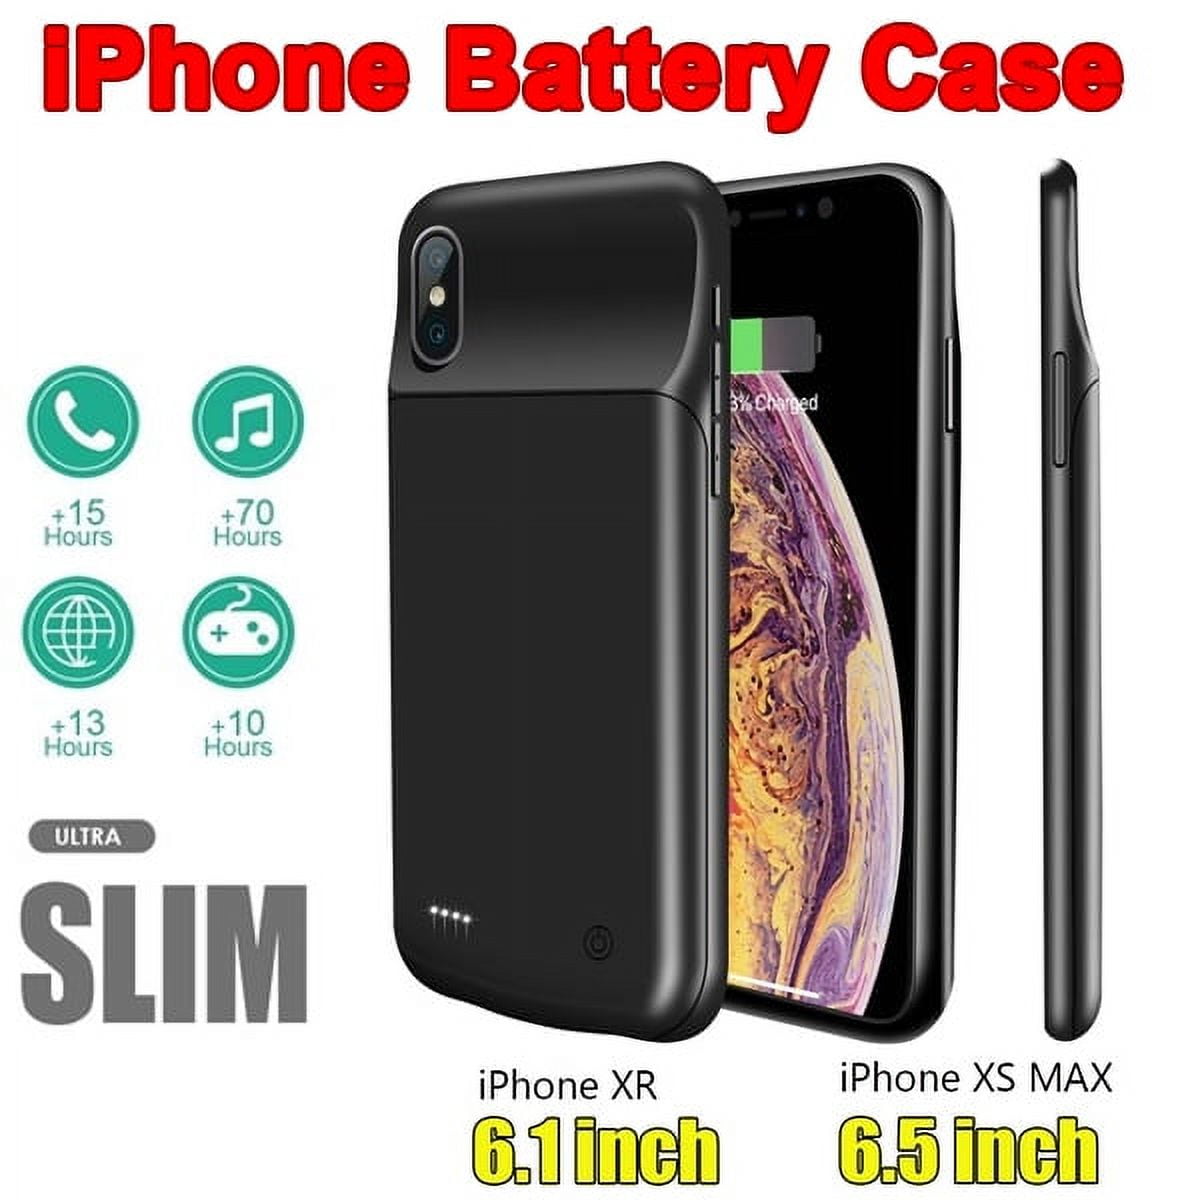 BATERÍA iPhone 🔋 iPhone 11 / 11 pro / 11 Pro Max iPhone X / XS / XS MAX /  XR iPhone 7 / 7 plus / 8 / 8 plus iPhone